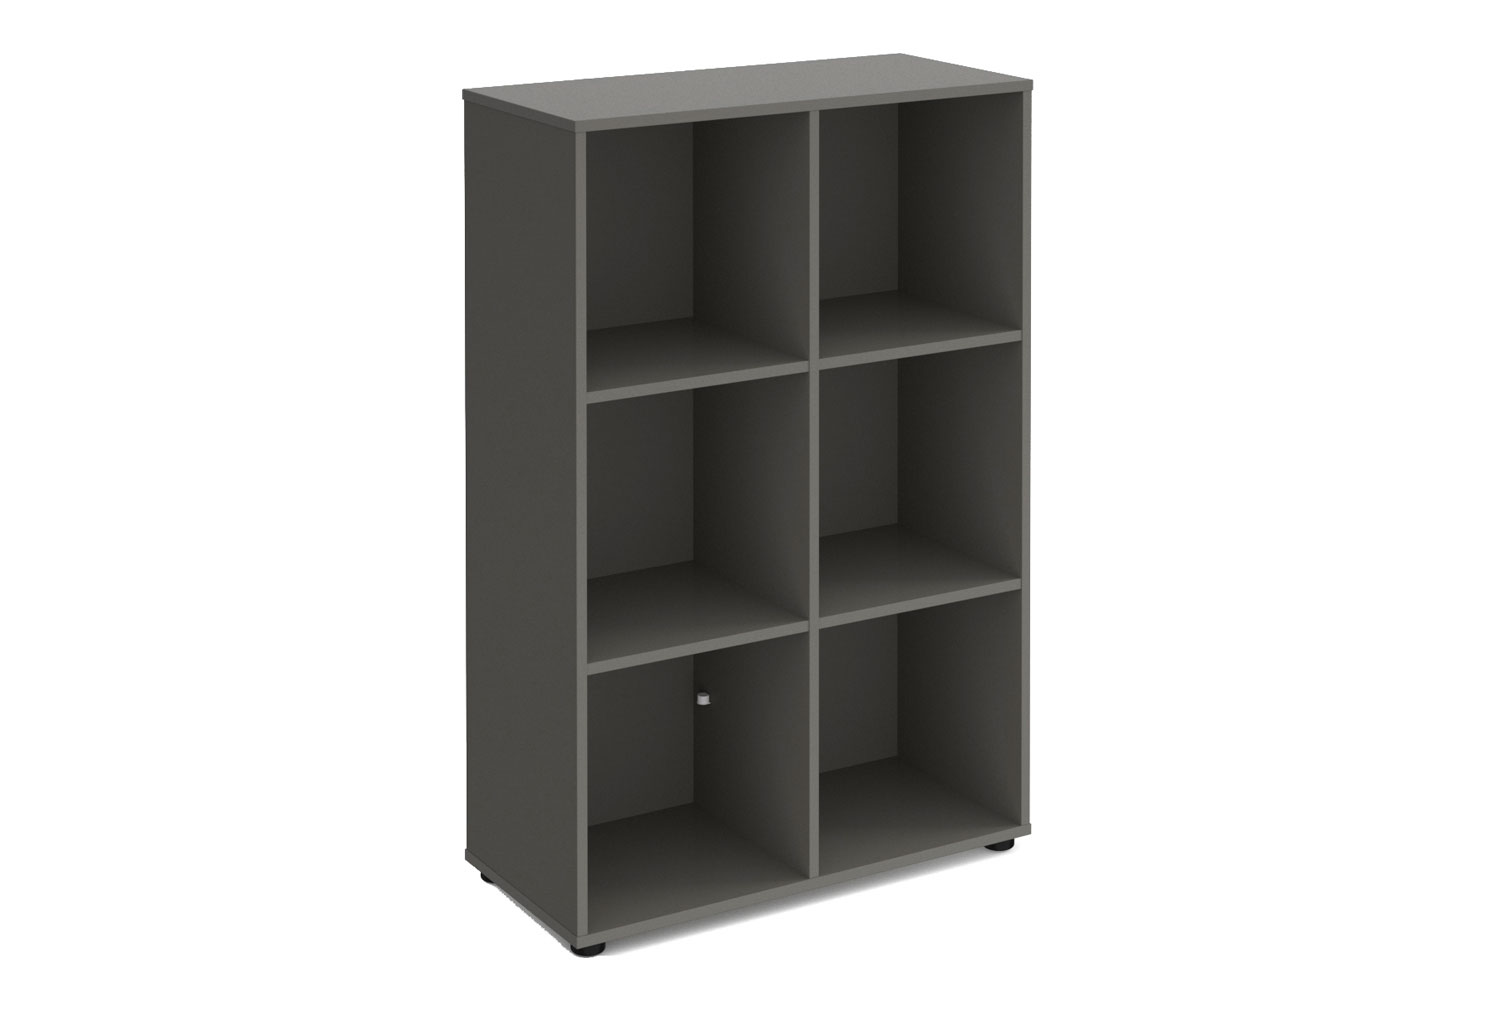 Brick Home Office 6 Cube Storage Unit (Vertical), Onyx Grey, Express Delivery